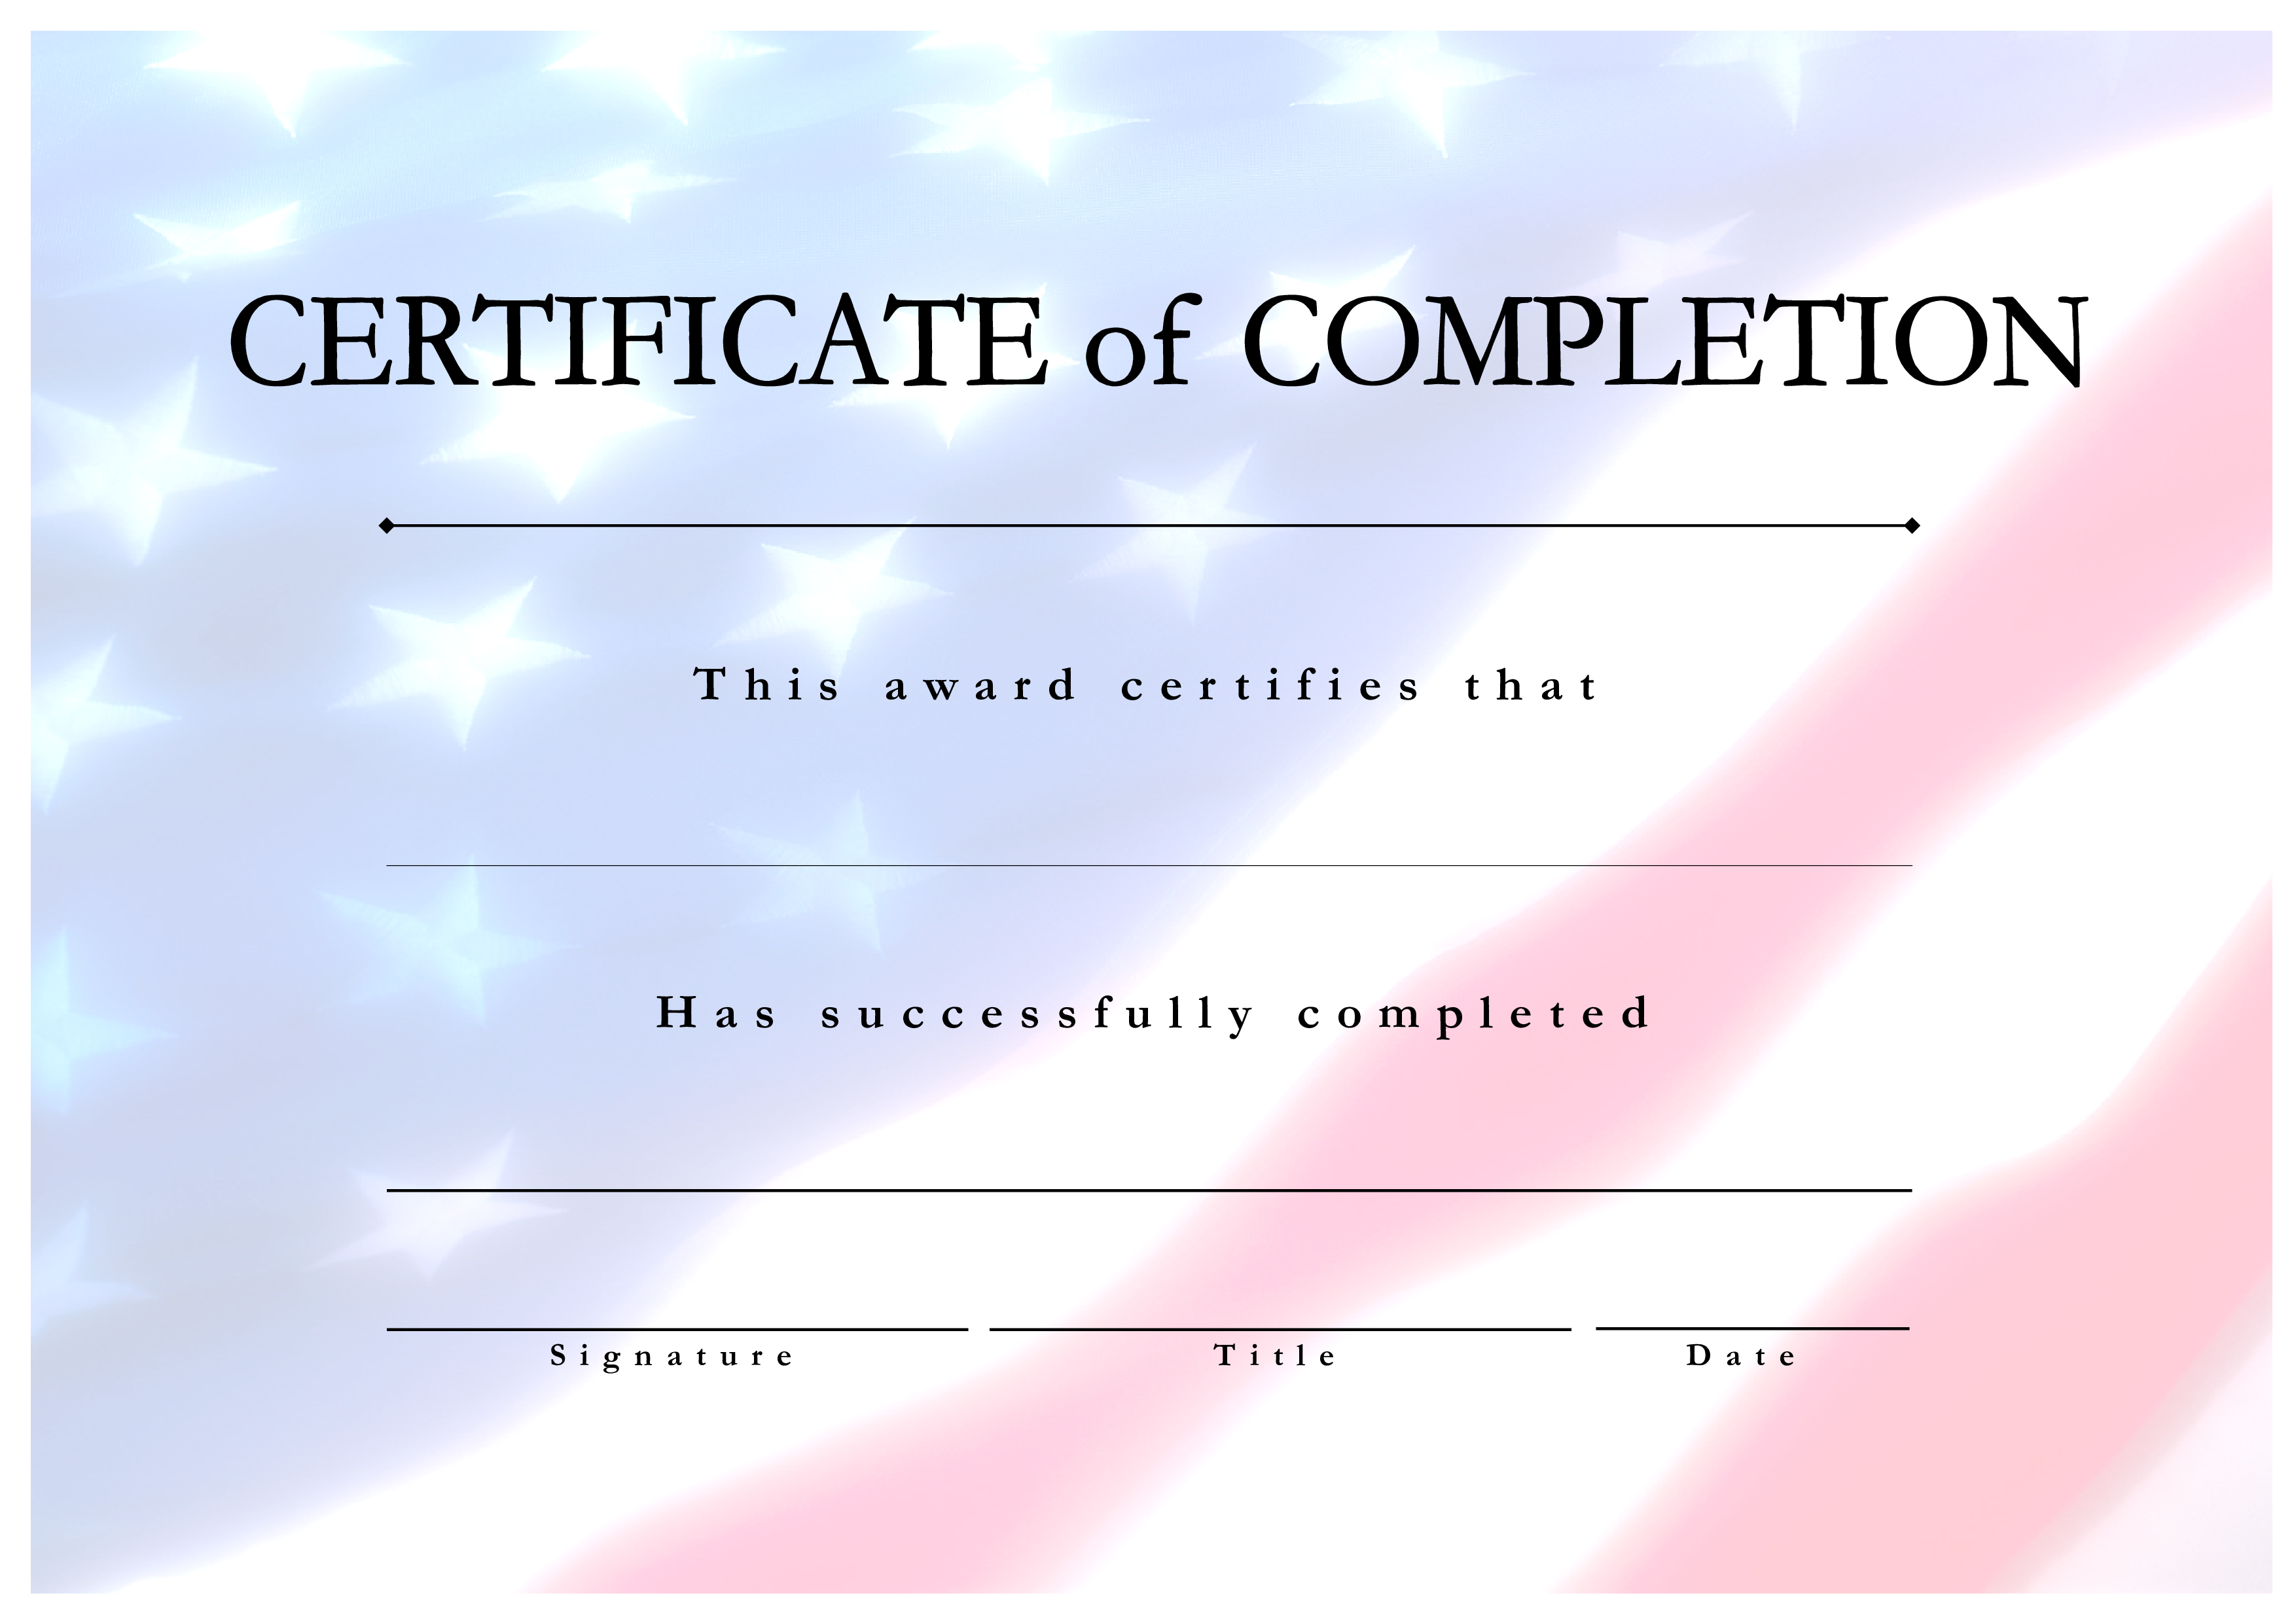 Certificate Of Completion USA project main image